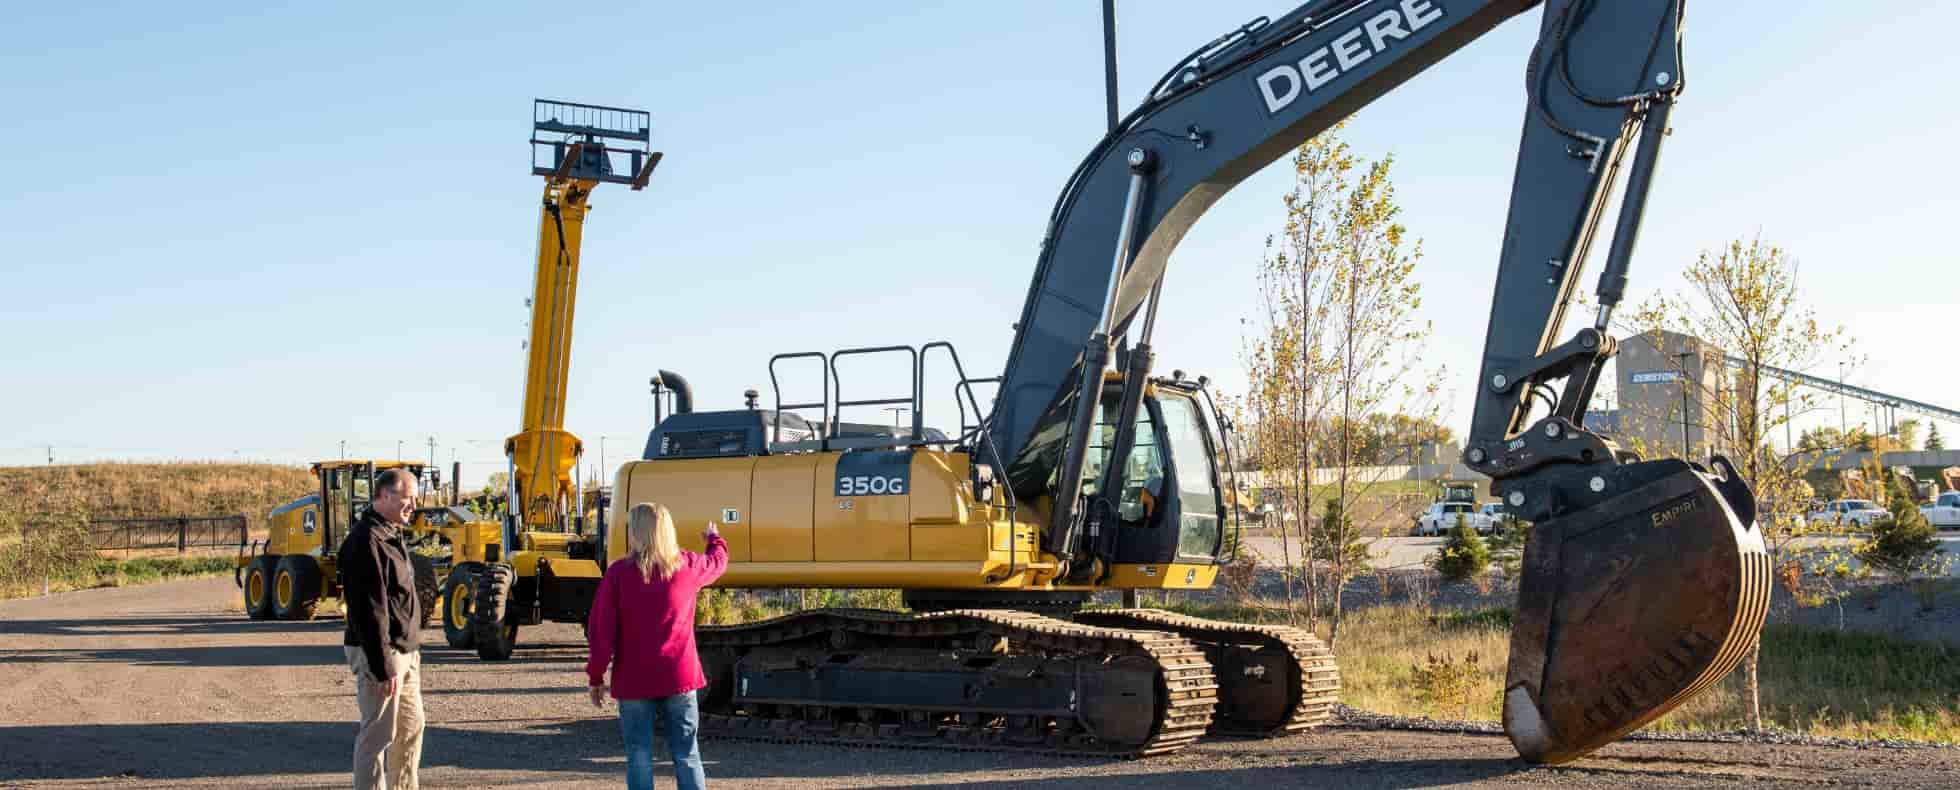 Three Things to Consider When Selling Pre-owned Equipment